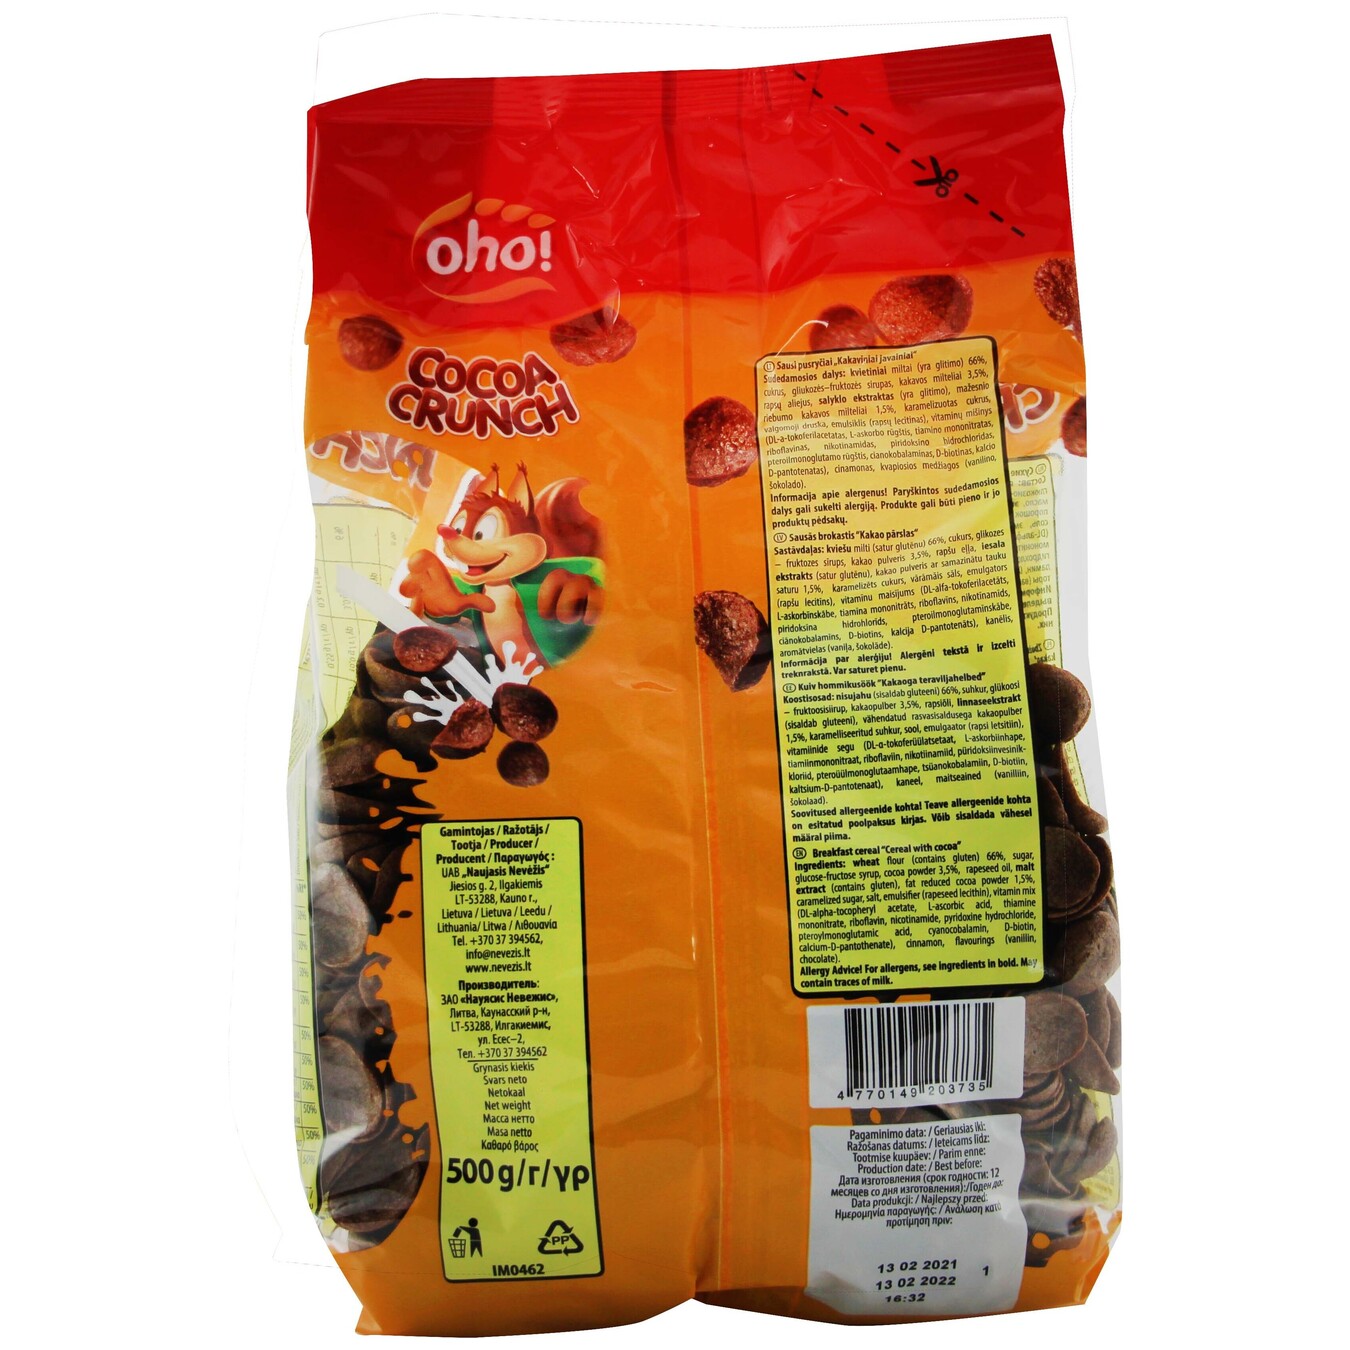 Oho Сосоа Сrunch Dry Breakfast with Cocoa 500g 2